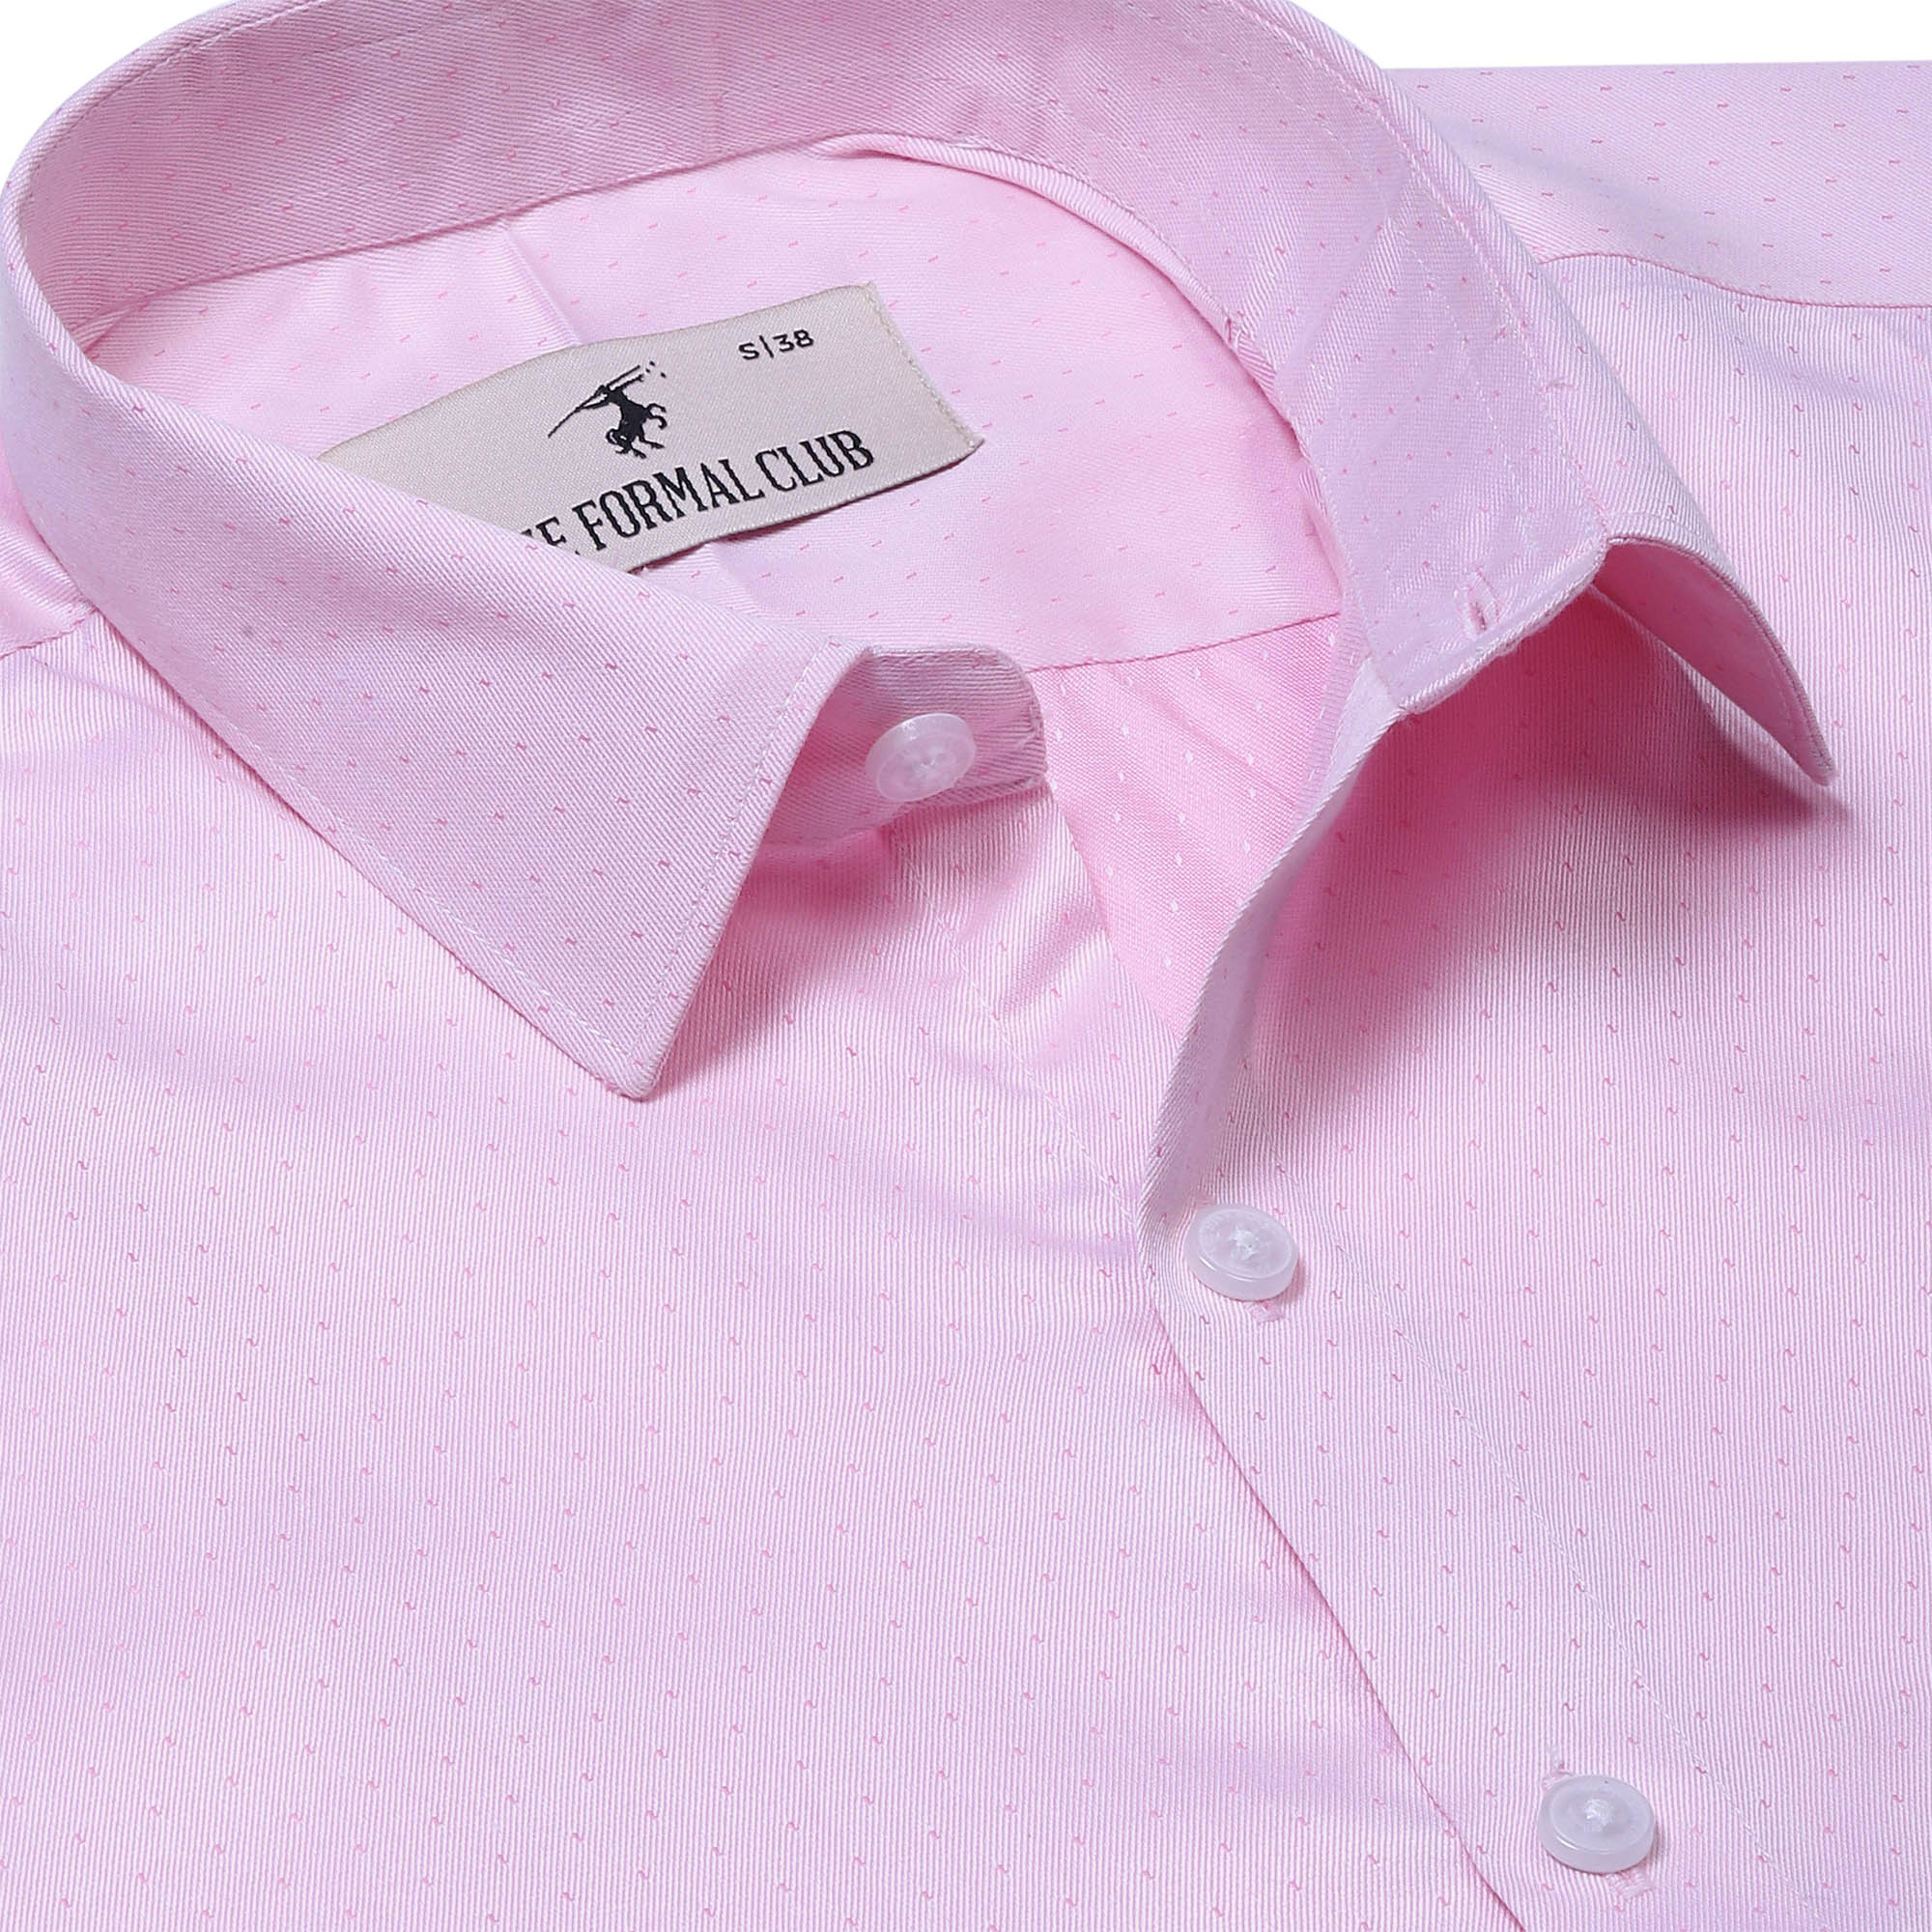 Donald Dobby Textured Shirt in Pink - The Formal Club